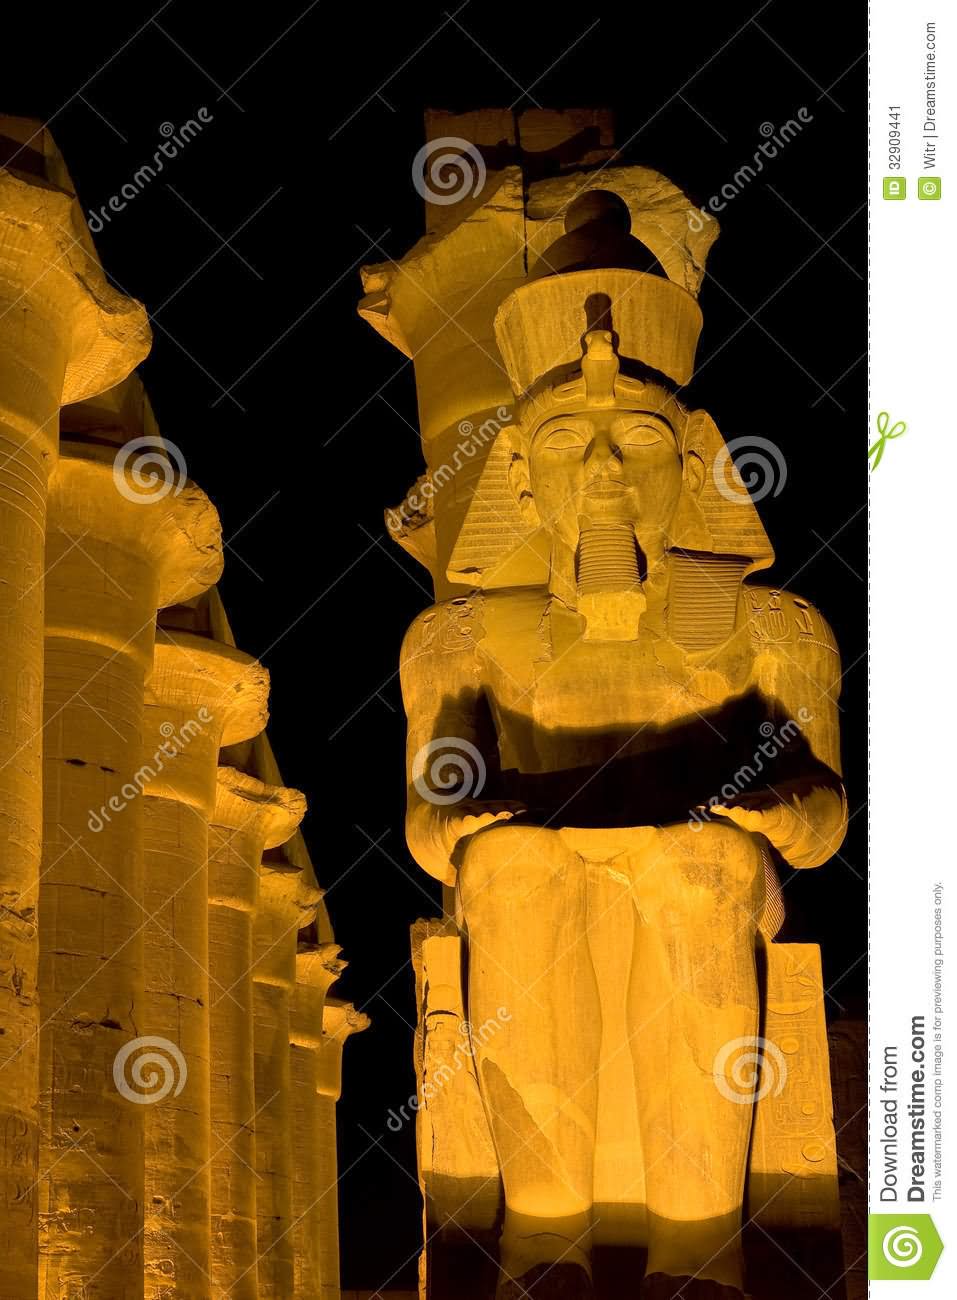 Ramses Statue At Luxor Temple At Night